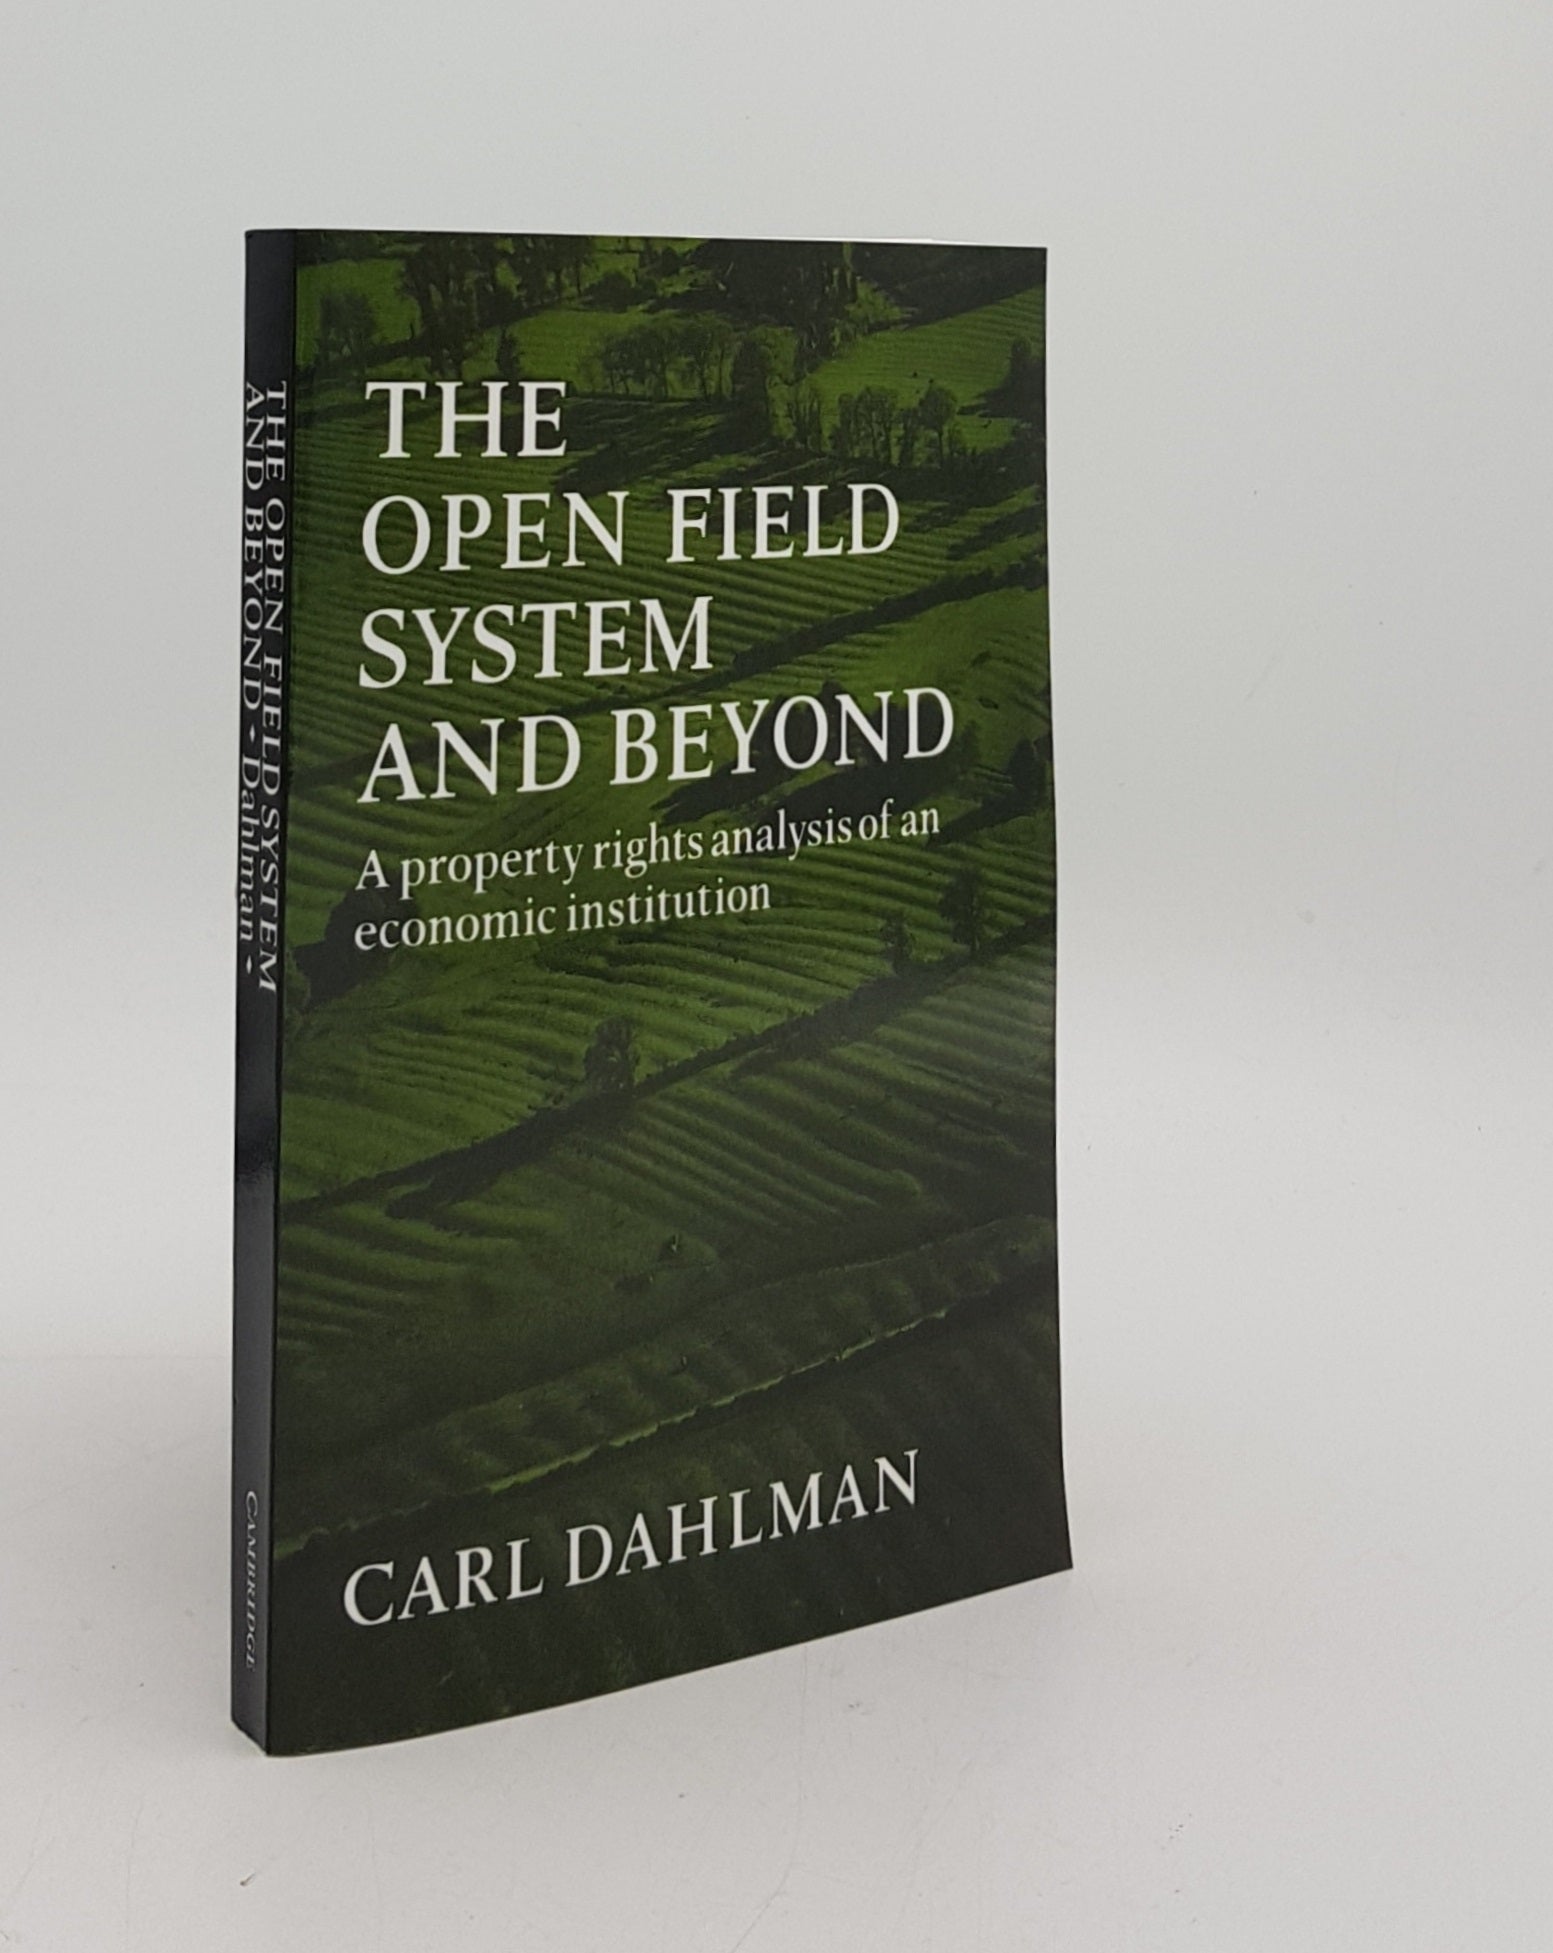 DAHLMAN Carl - The Open Field System and Beyond a Property Rights Analysis of an Economic Institution